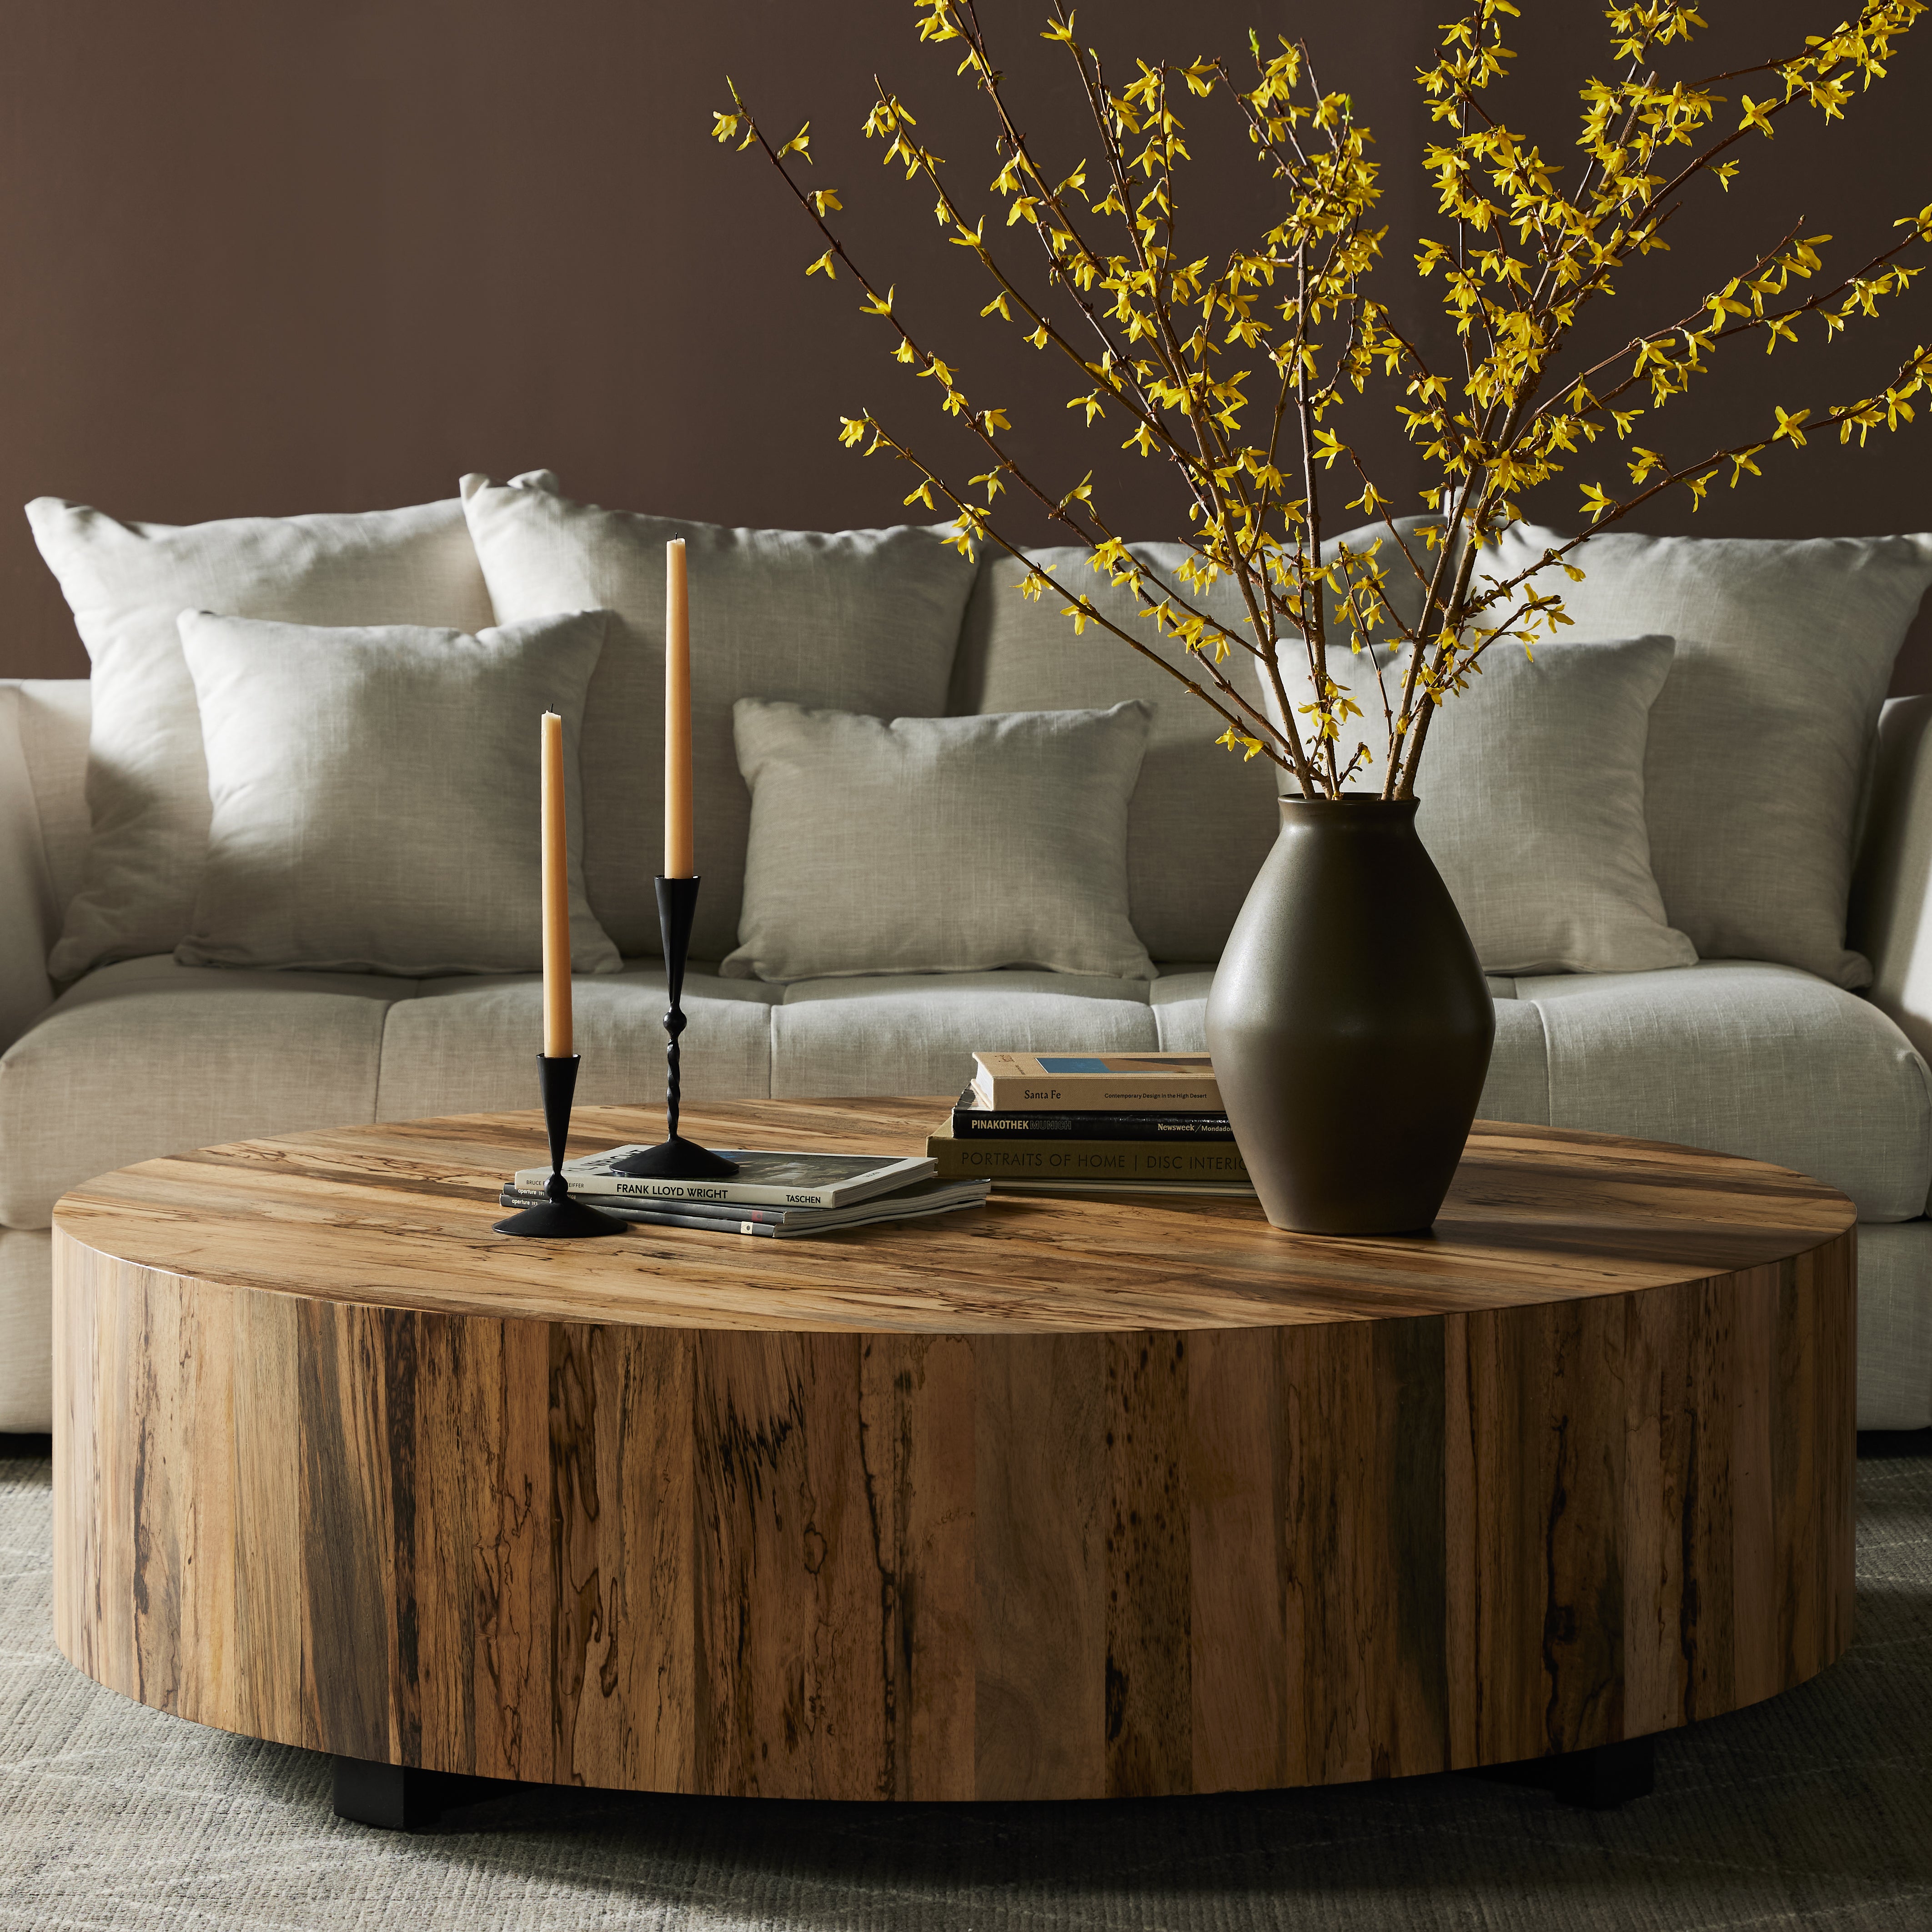 Stunning forces of nature are captured in a coffee table, as spalted primavera wood is hand-shaped into a cylindrical silhouette. Reflective of woods' natural character, a slight color variance is possible. Amethyst Home provides interior design, new construction, custom furniture, and area rugs in the Tampa metro area.